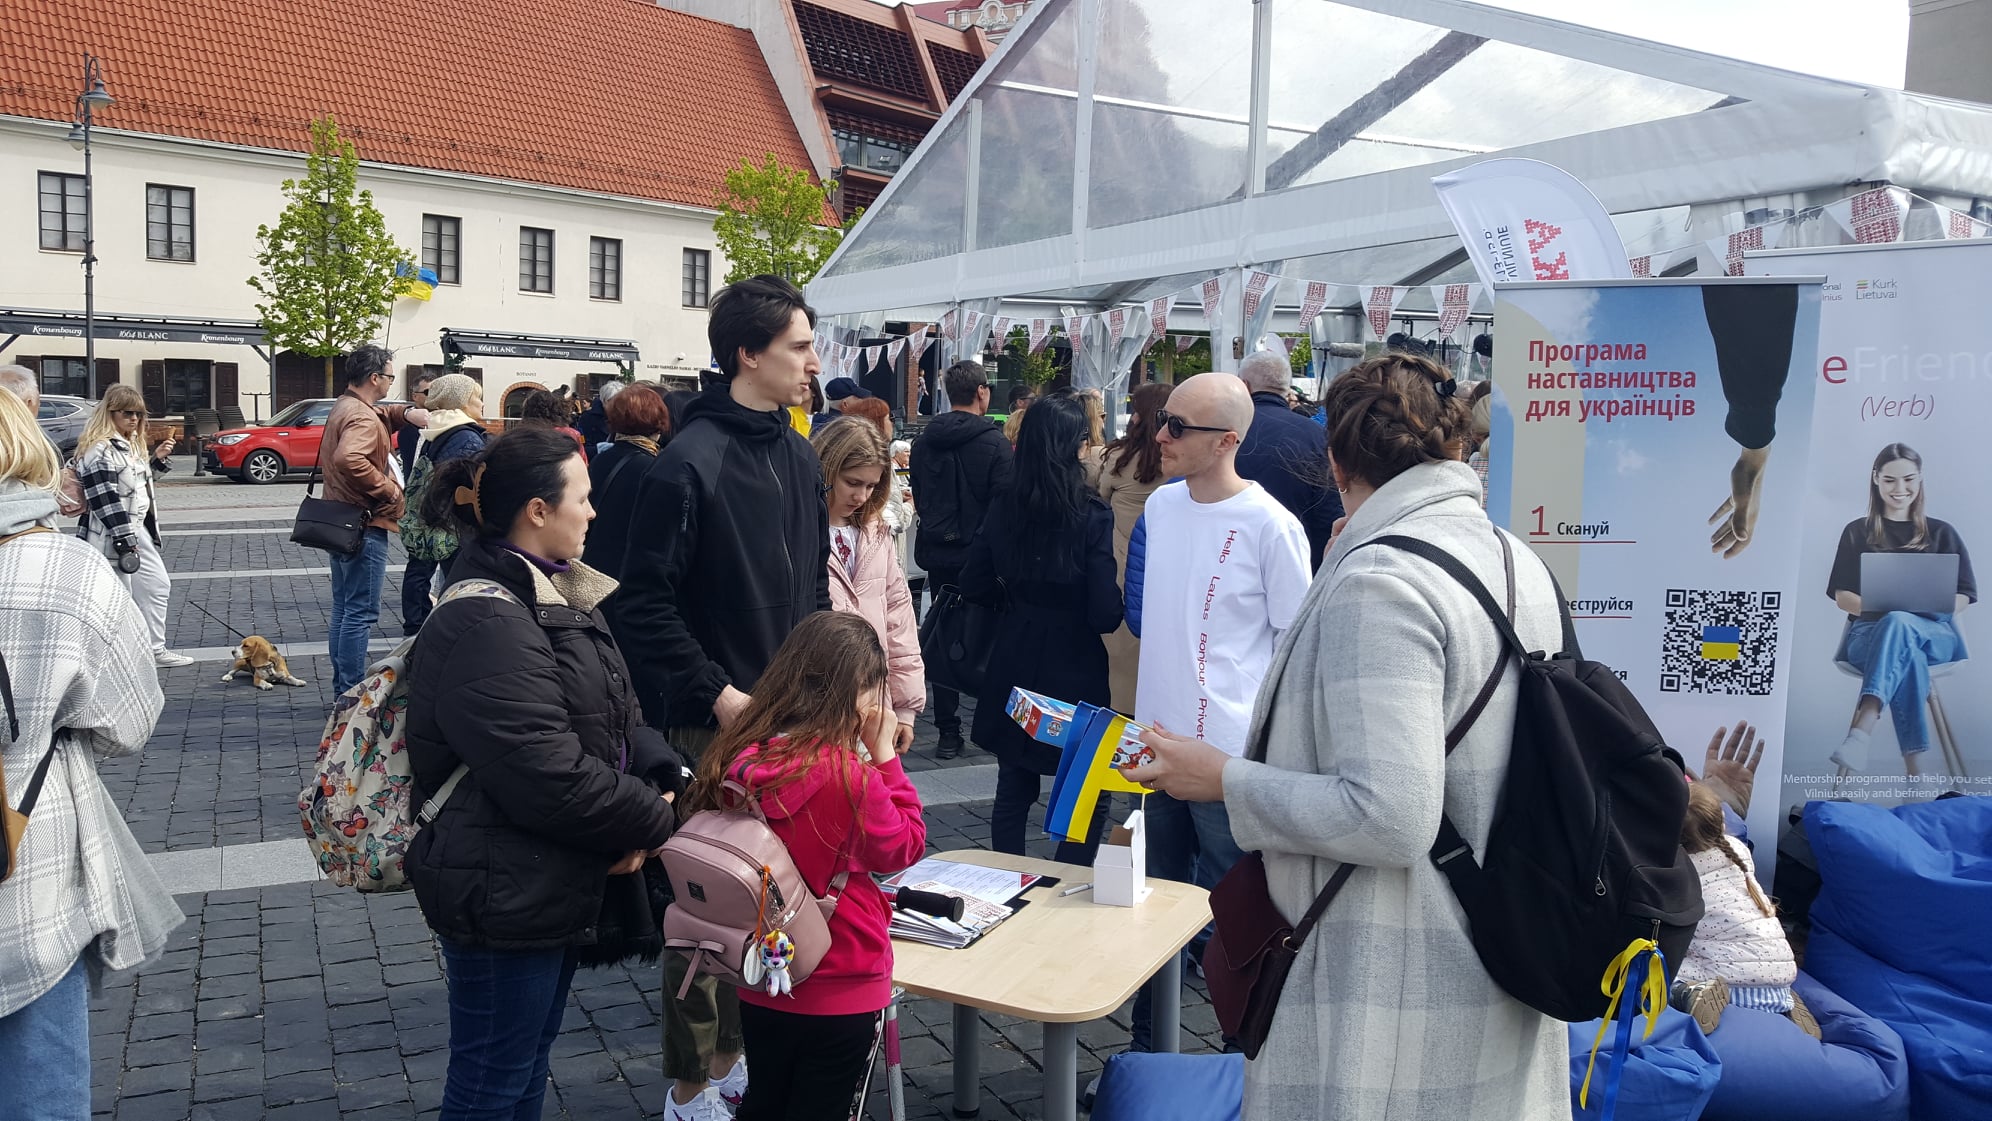 People learn about Befriend Vilnius at a table set up outside.